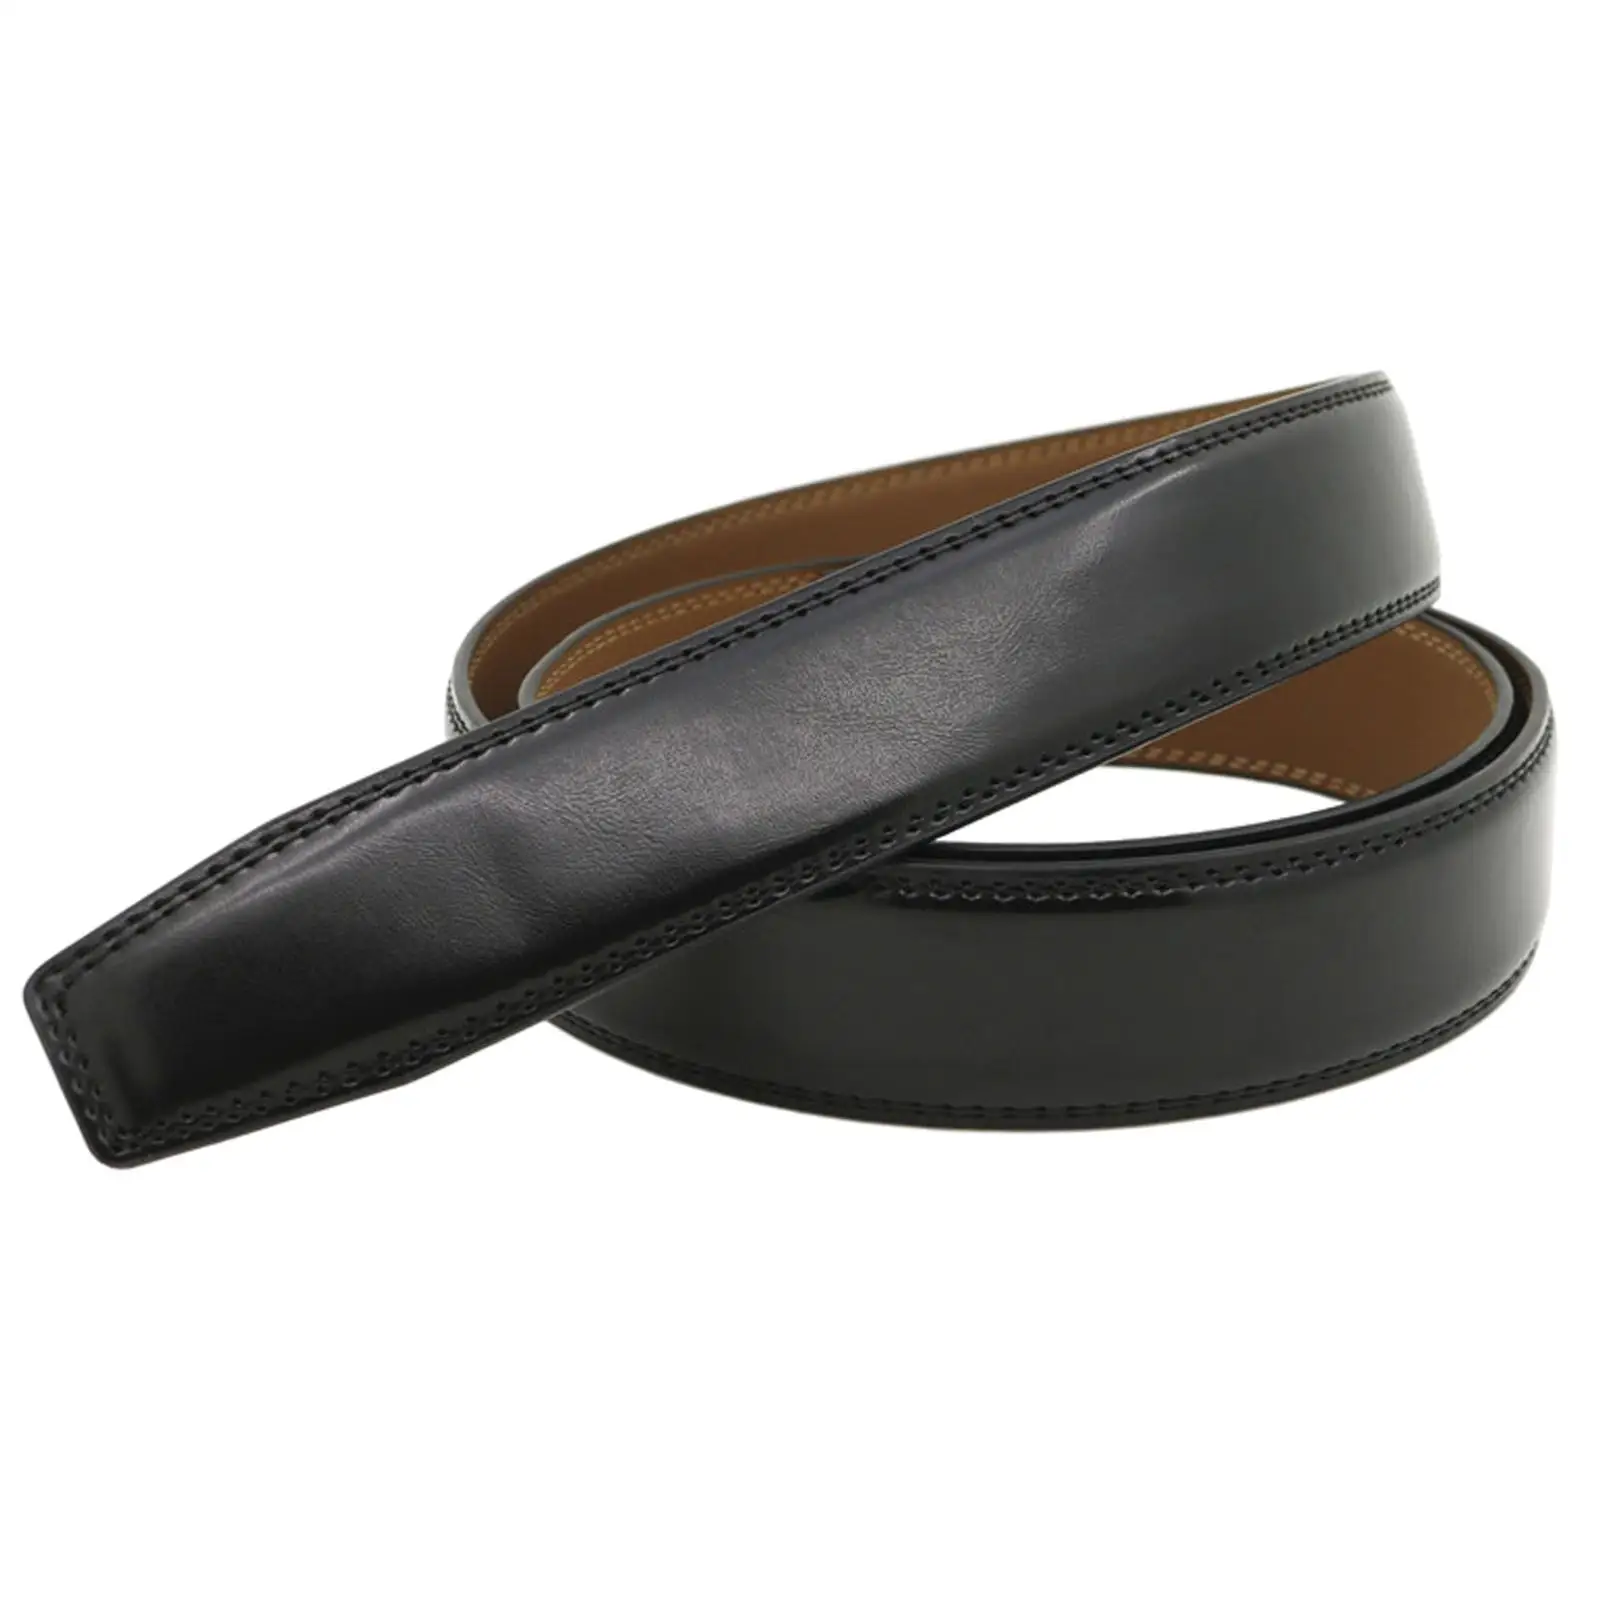 3.5cm Wide Leather Belt High Quality Without Automatic Buckle Strap for Men